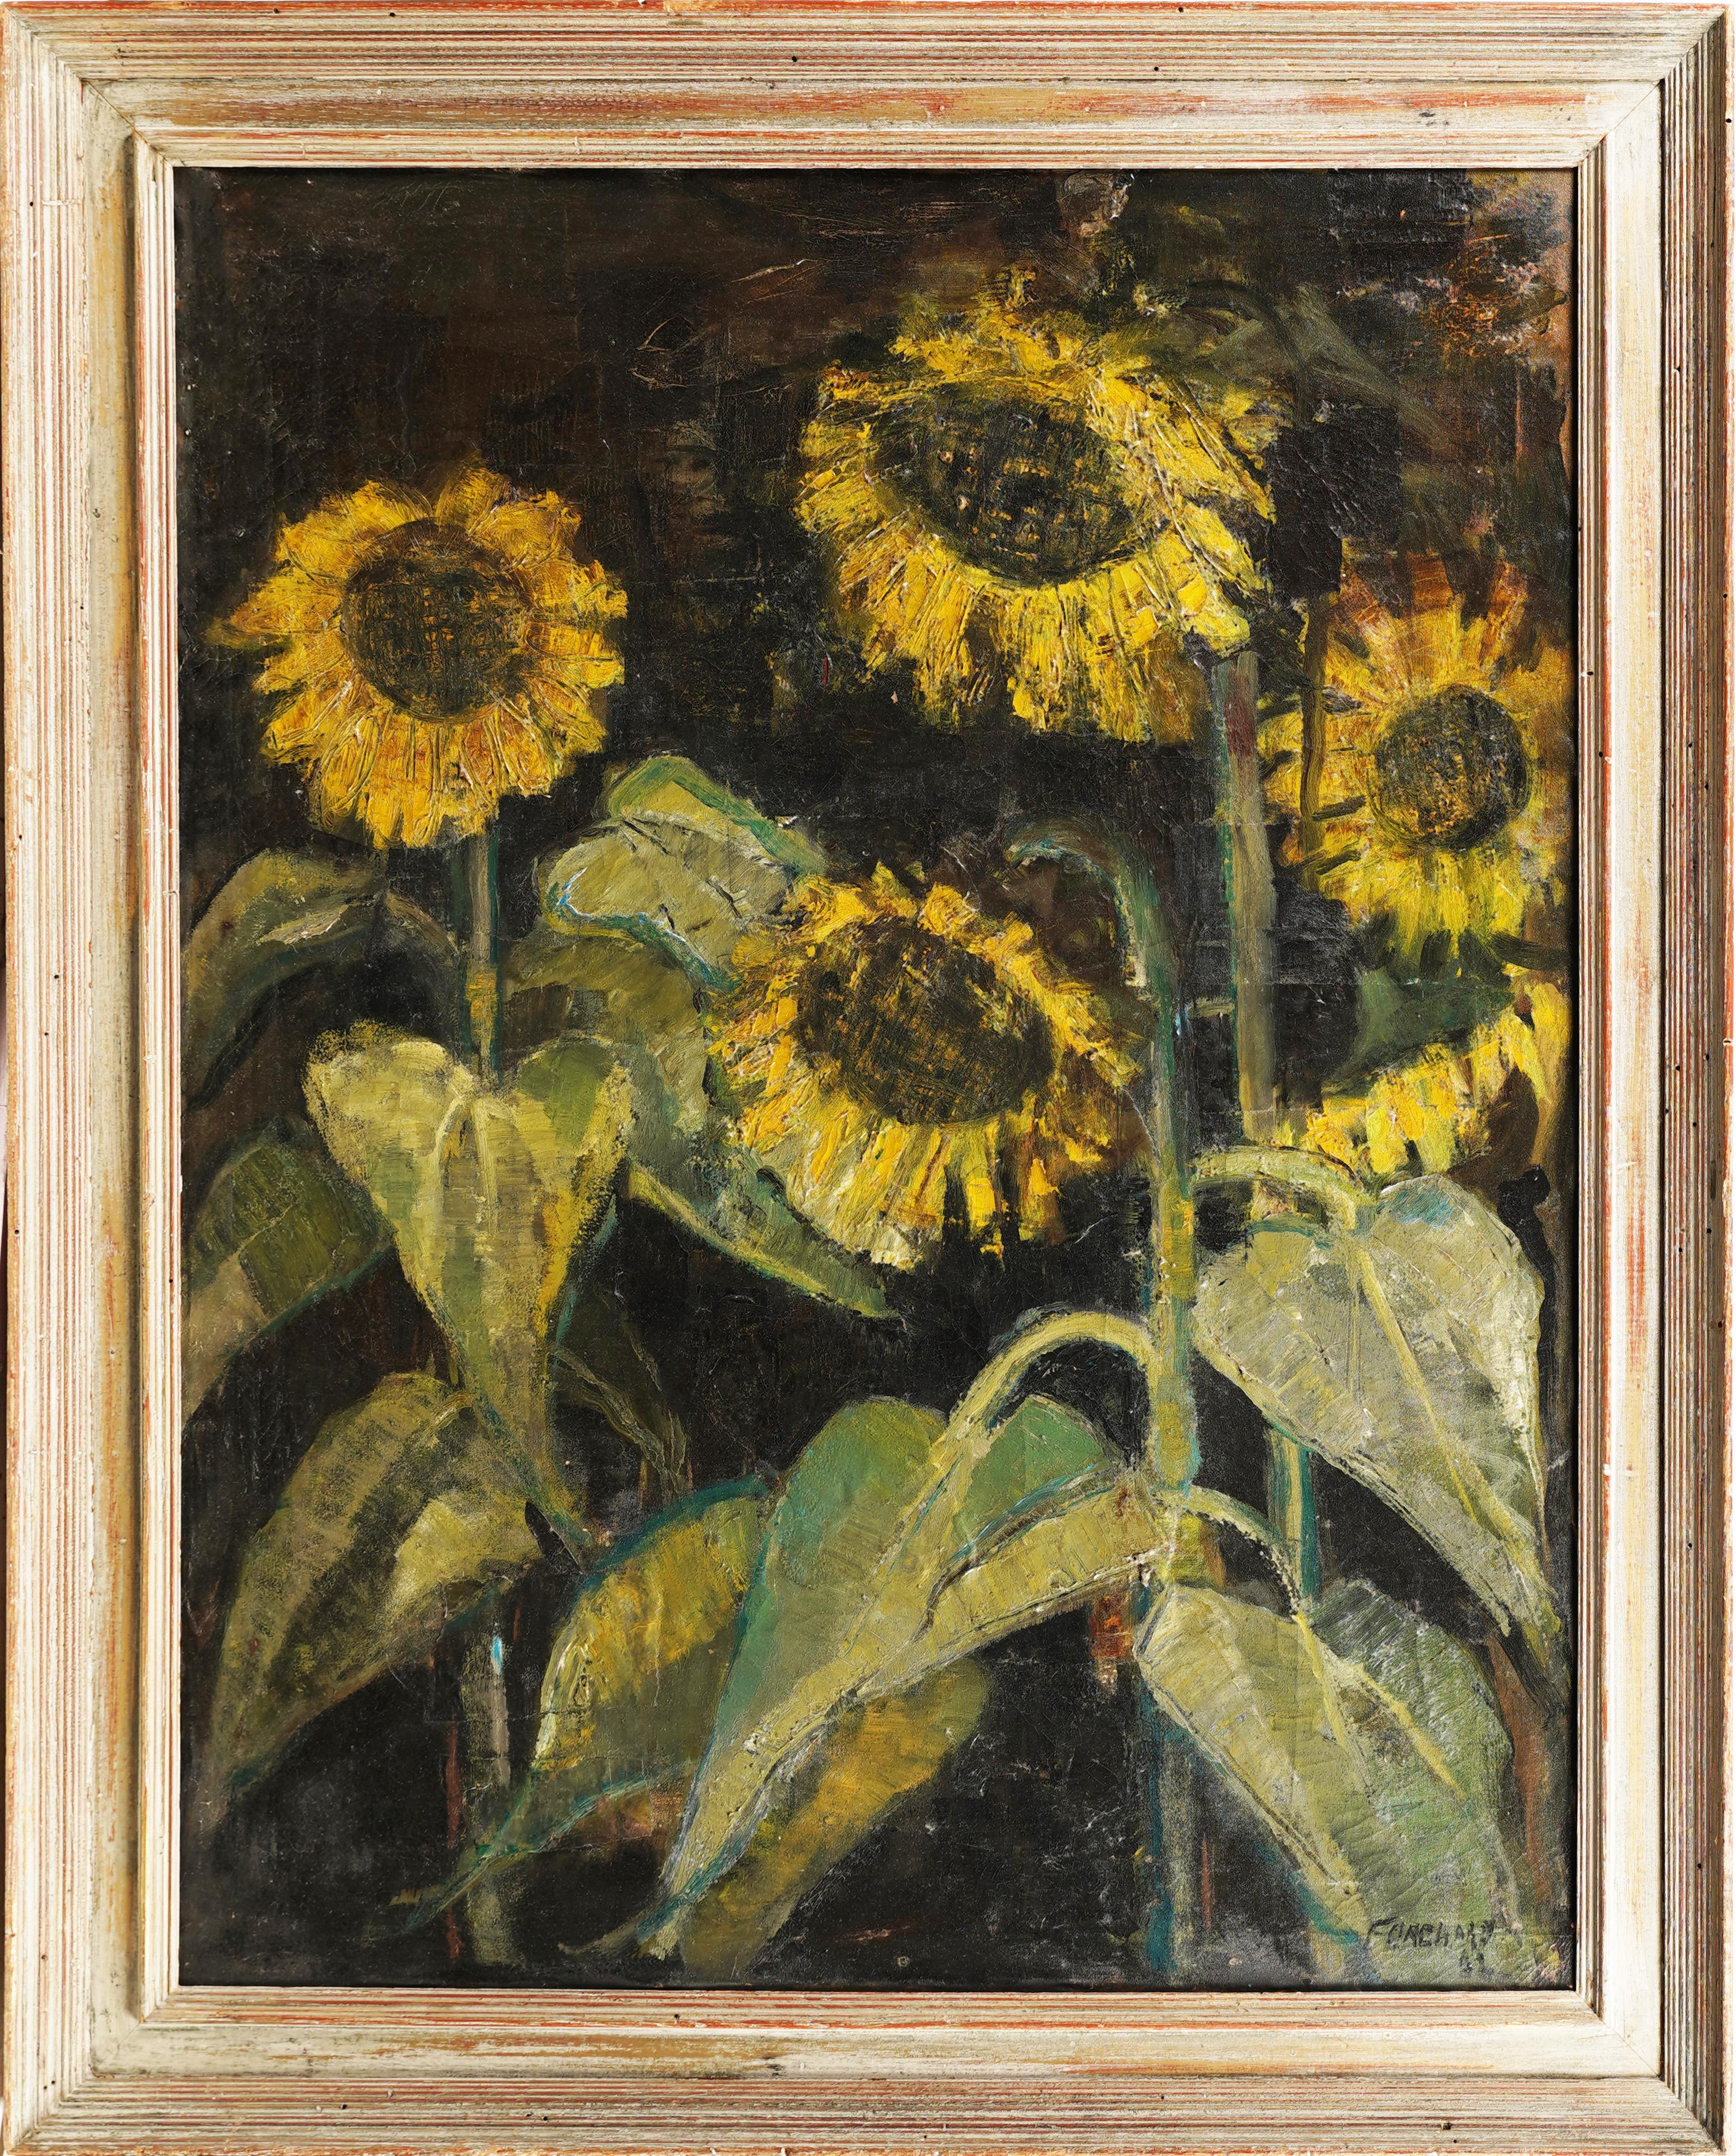 Unknown Still-Life Painting - American School Signed Framed Modernist Large Sunflower Still Life Oil Painting